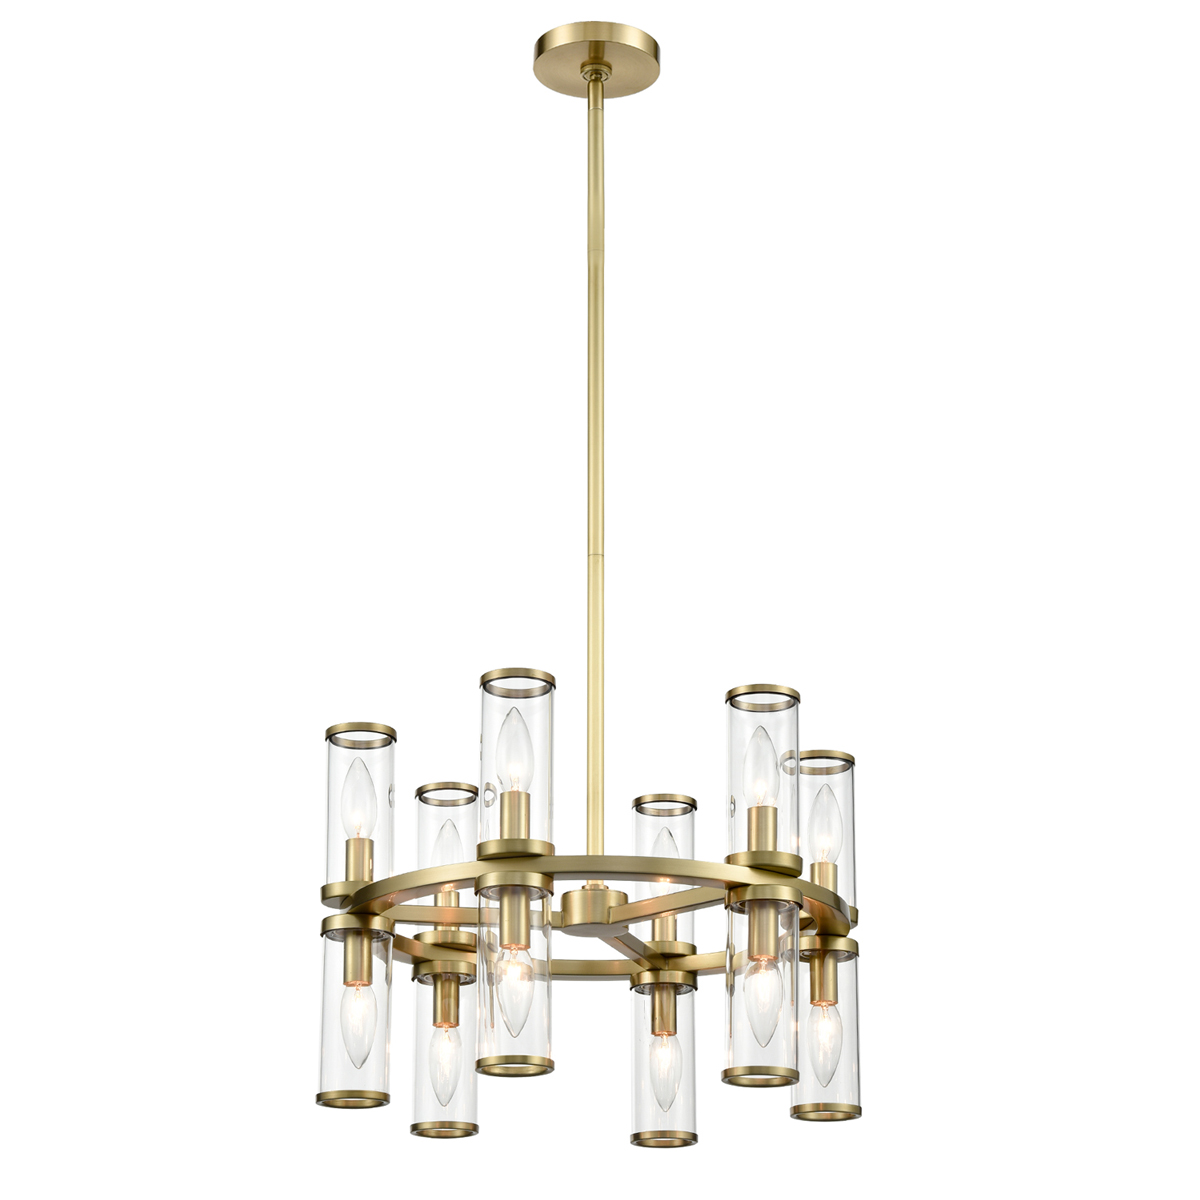 Люстра Delight Collection MD2061 MD2061-12B br.brass фото